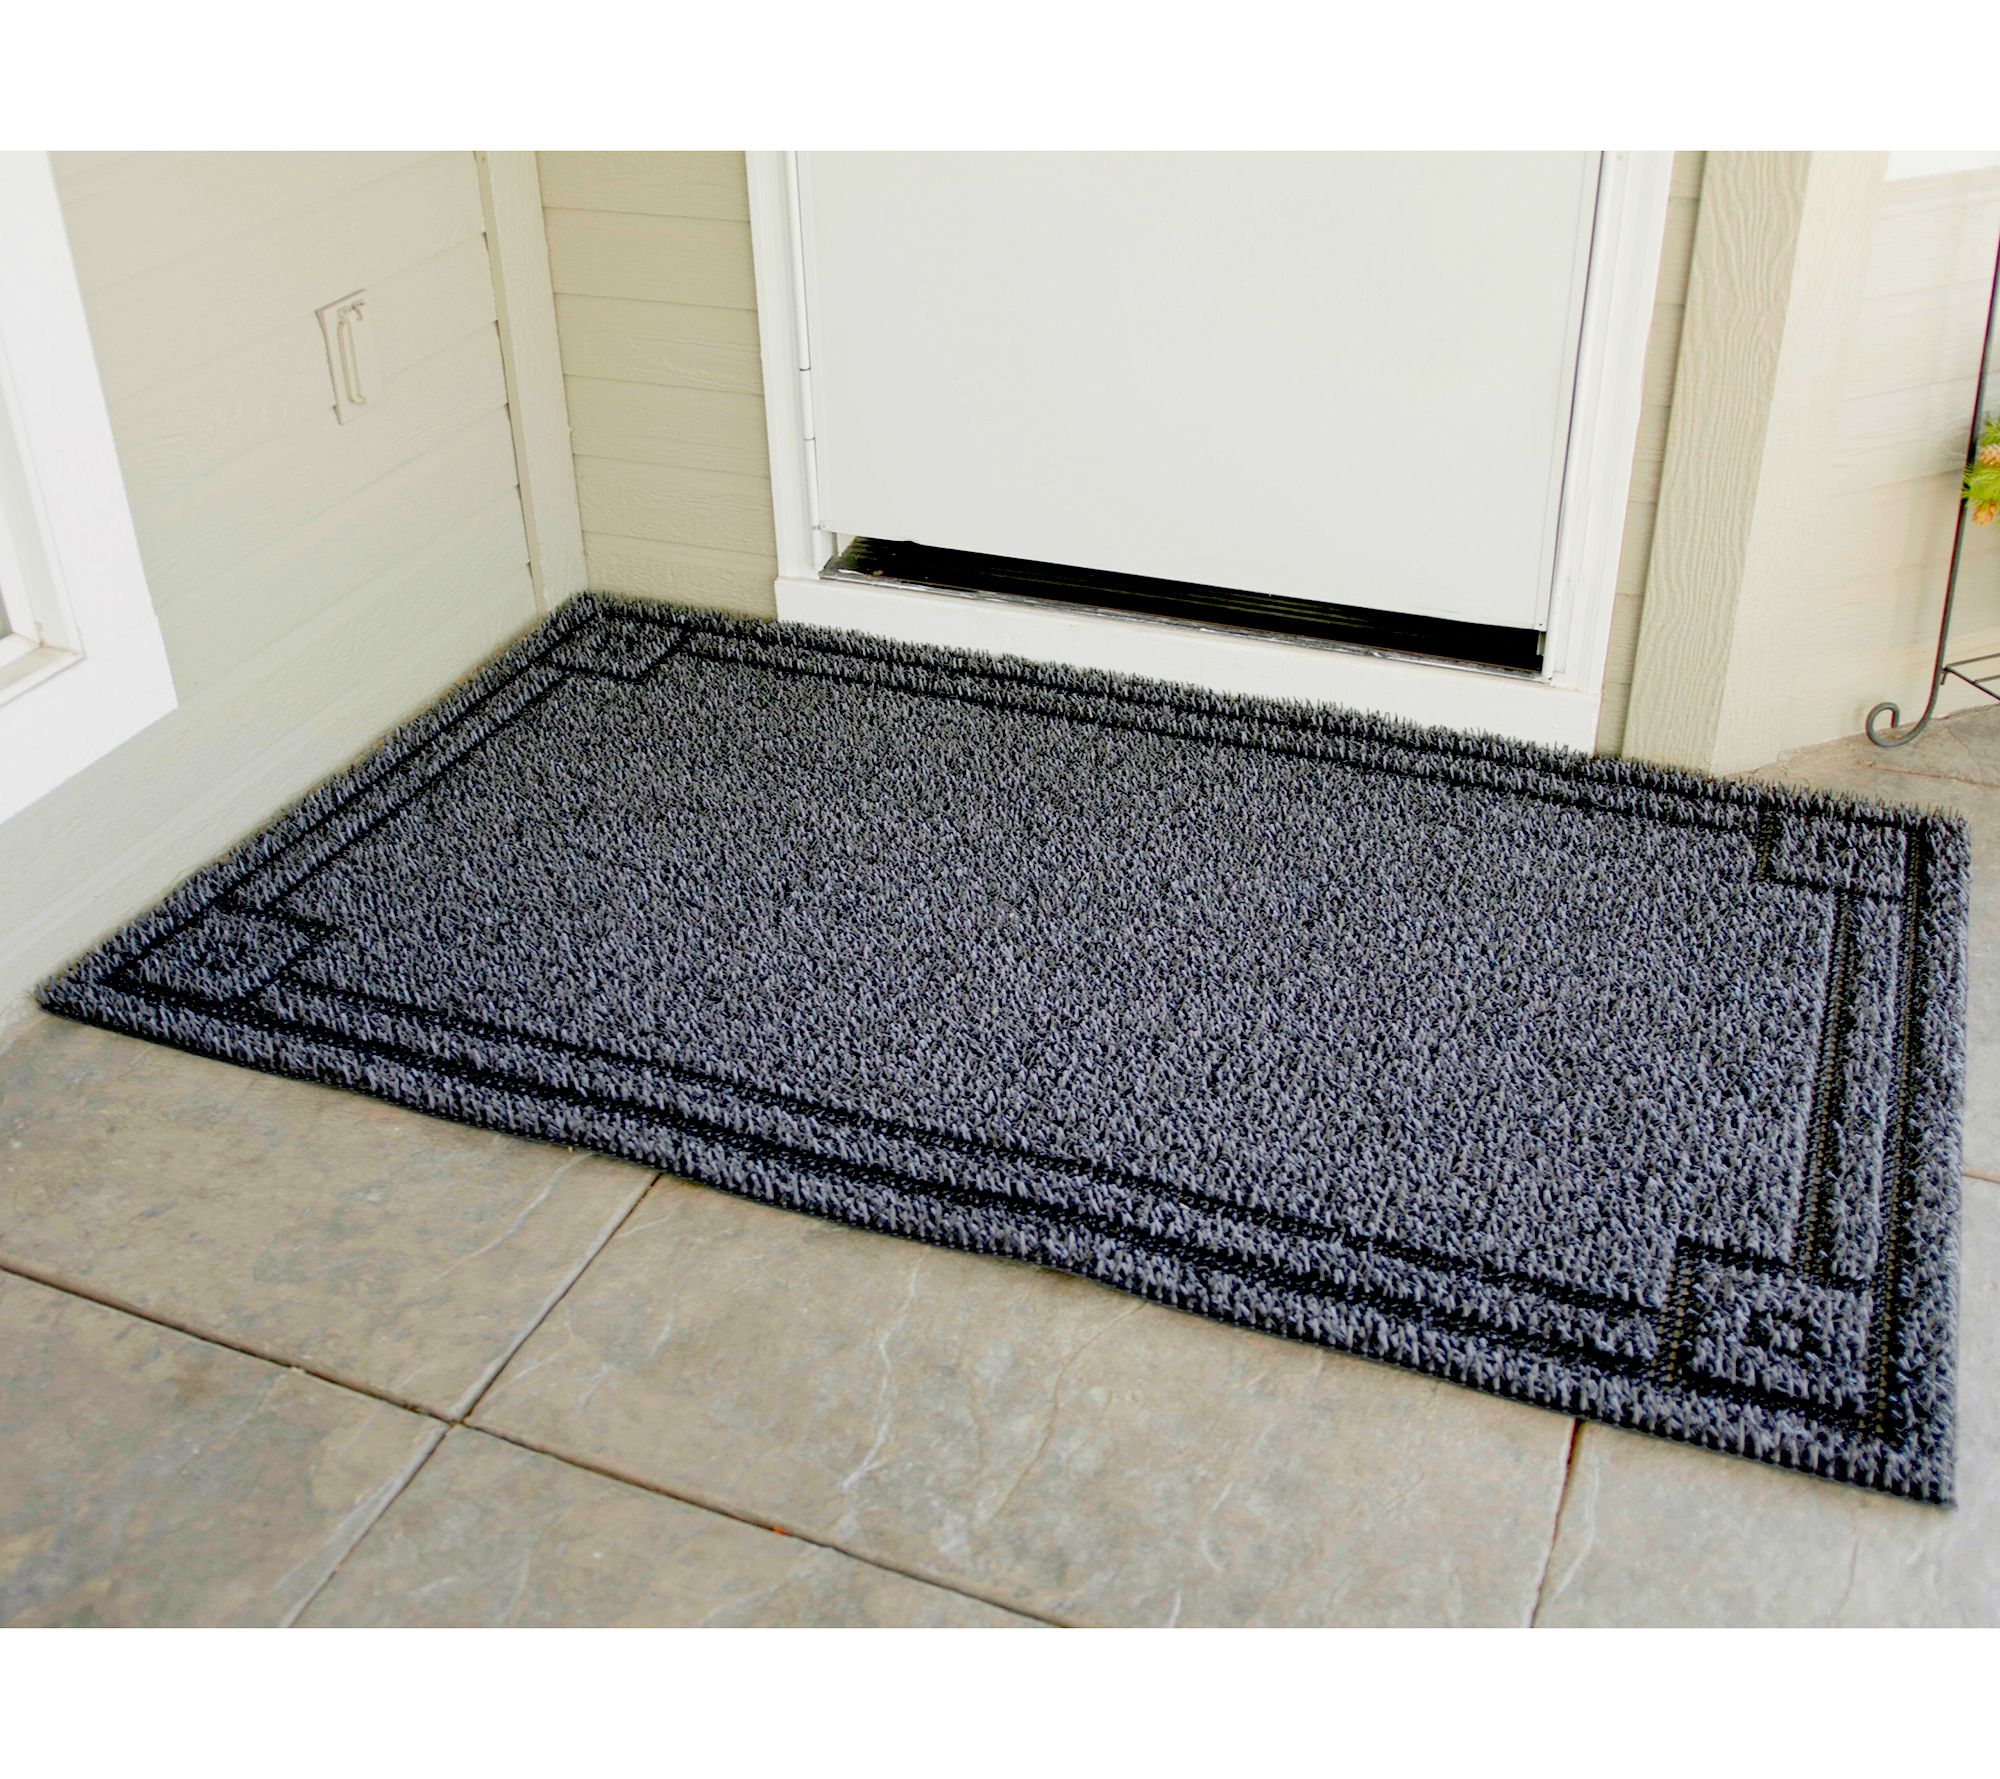 Don Aslett Outdoor Dirt Trapping Mat- Craftsman Style 3'x5